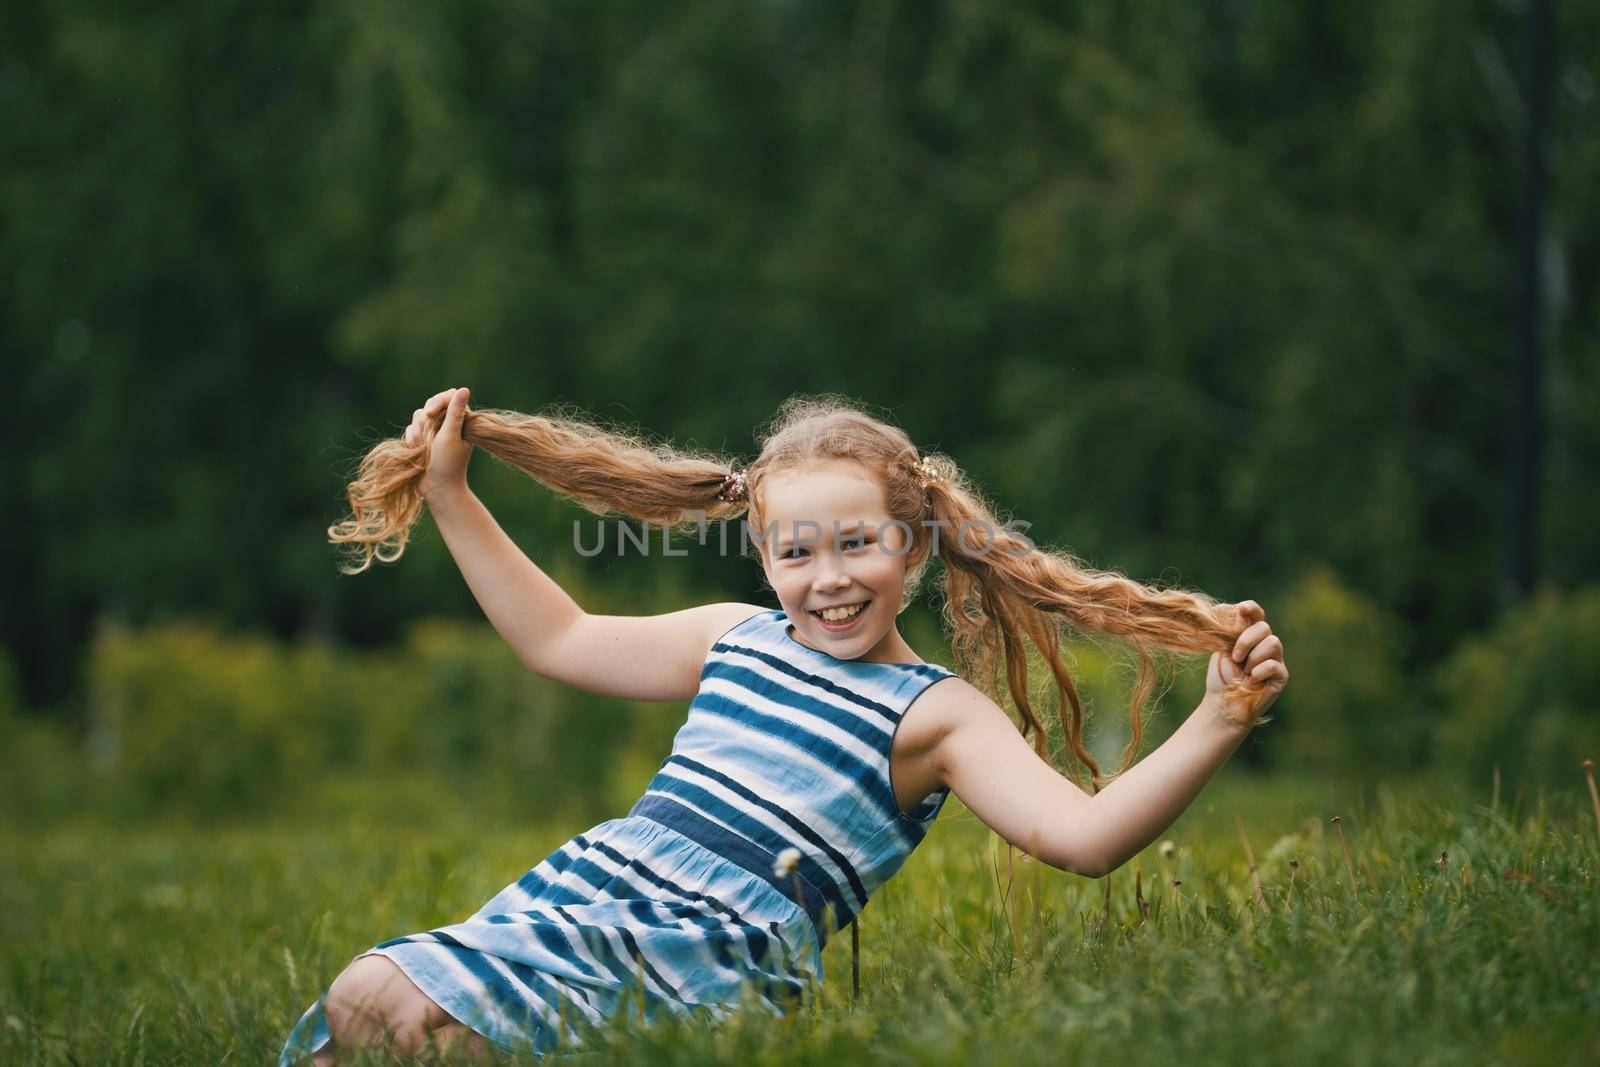 Smiling child girl wearing blue summer dress is playing in park, outdoor portrait